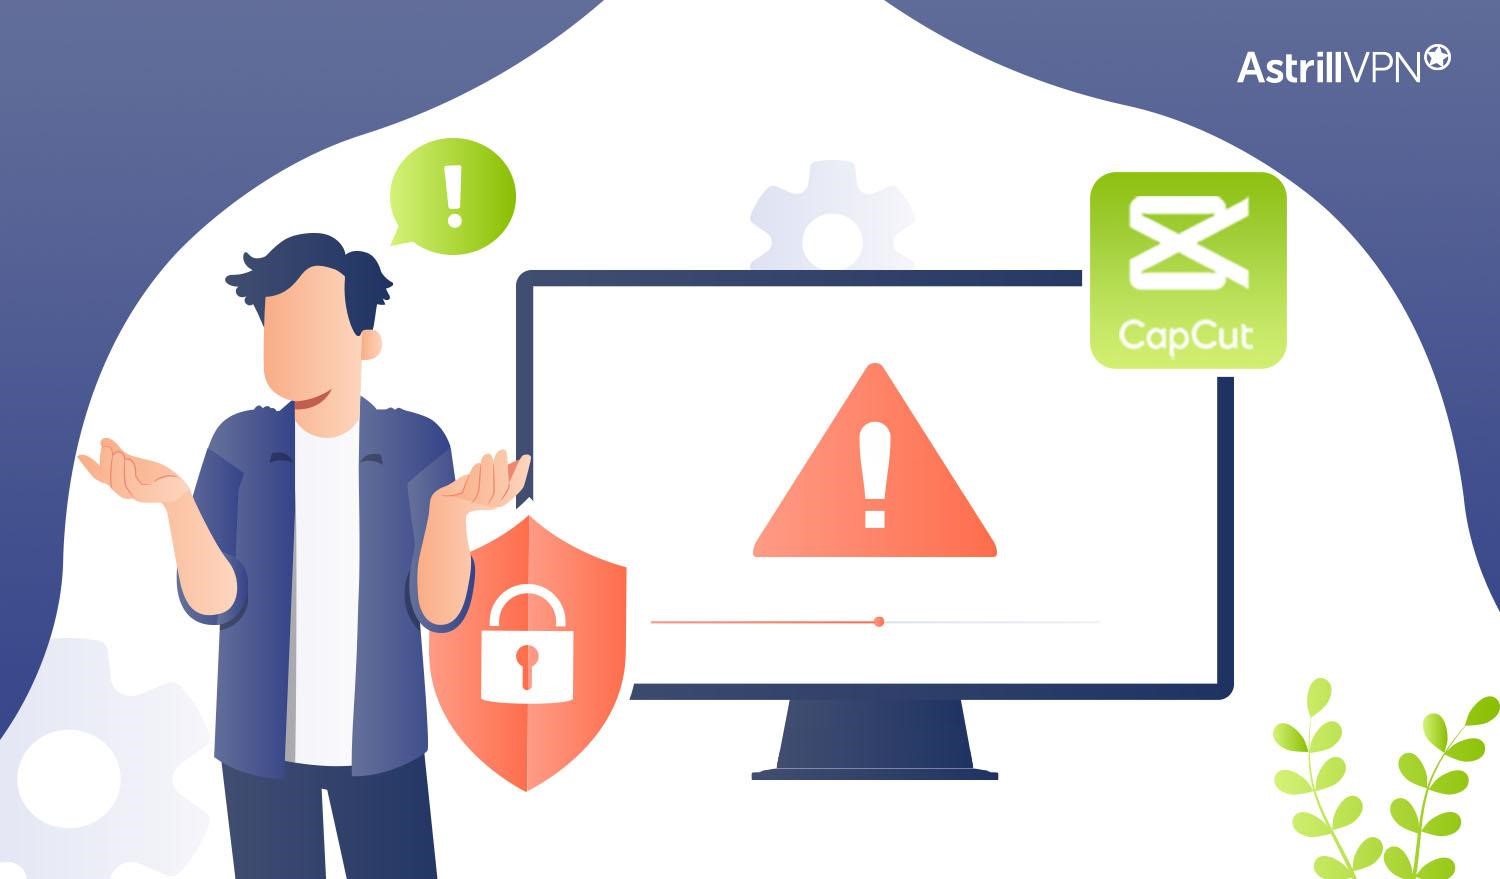 What are the risks of using a VPN for Capcut